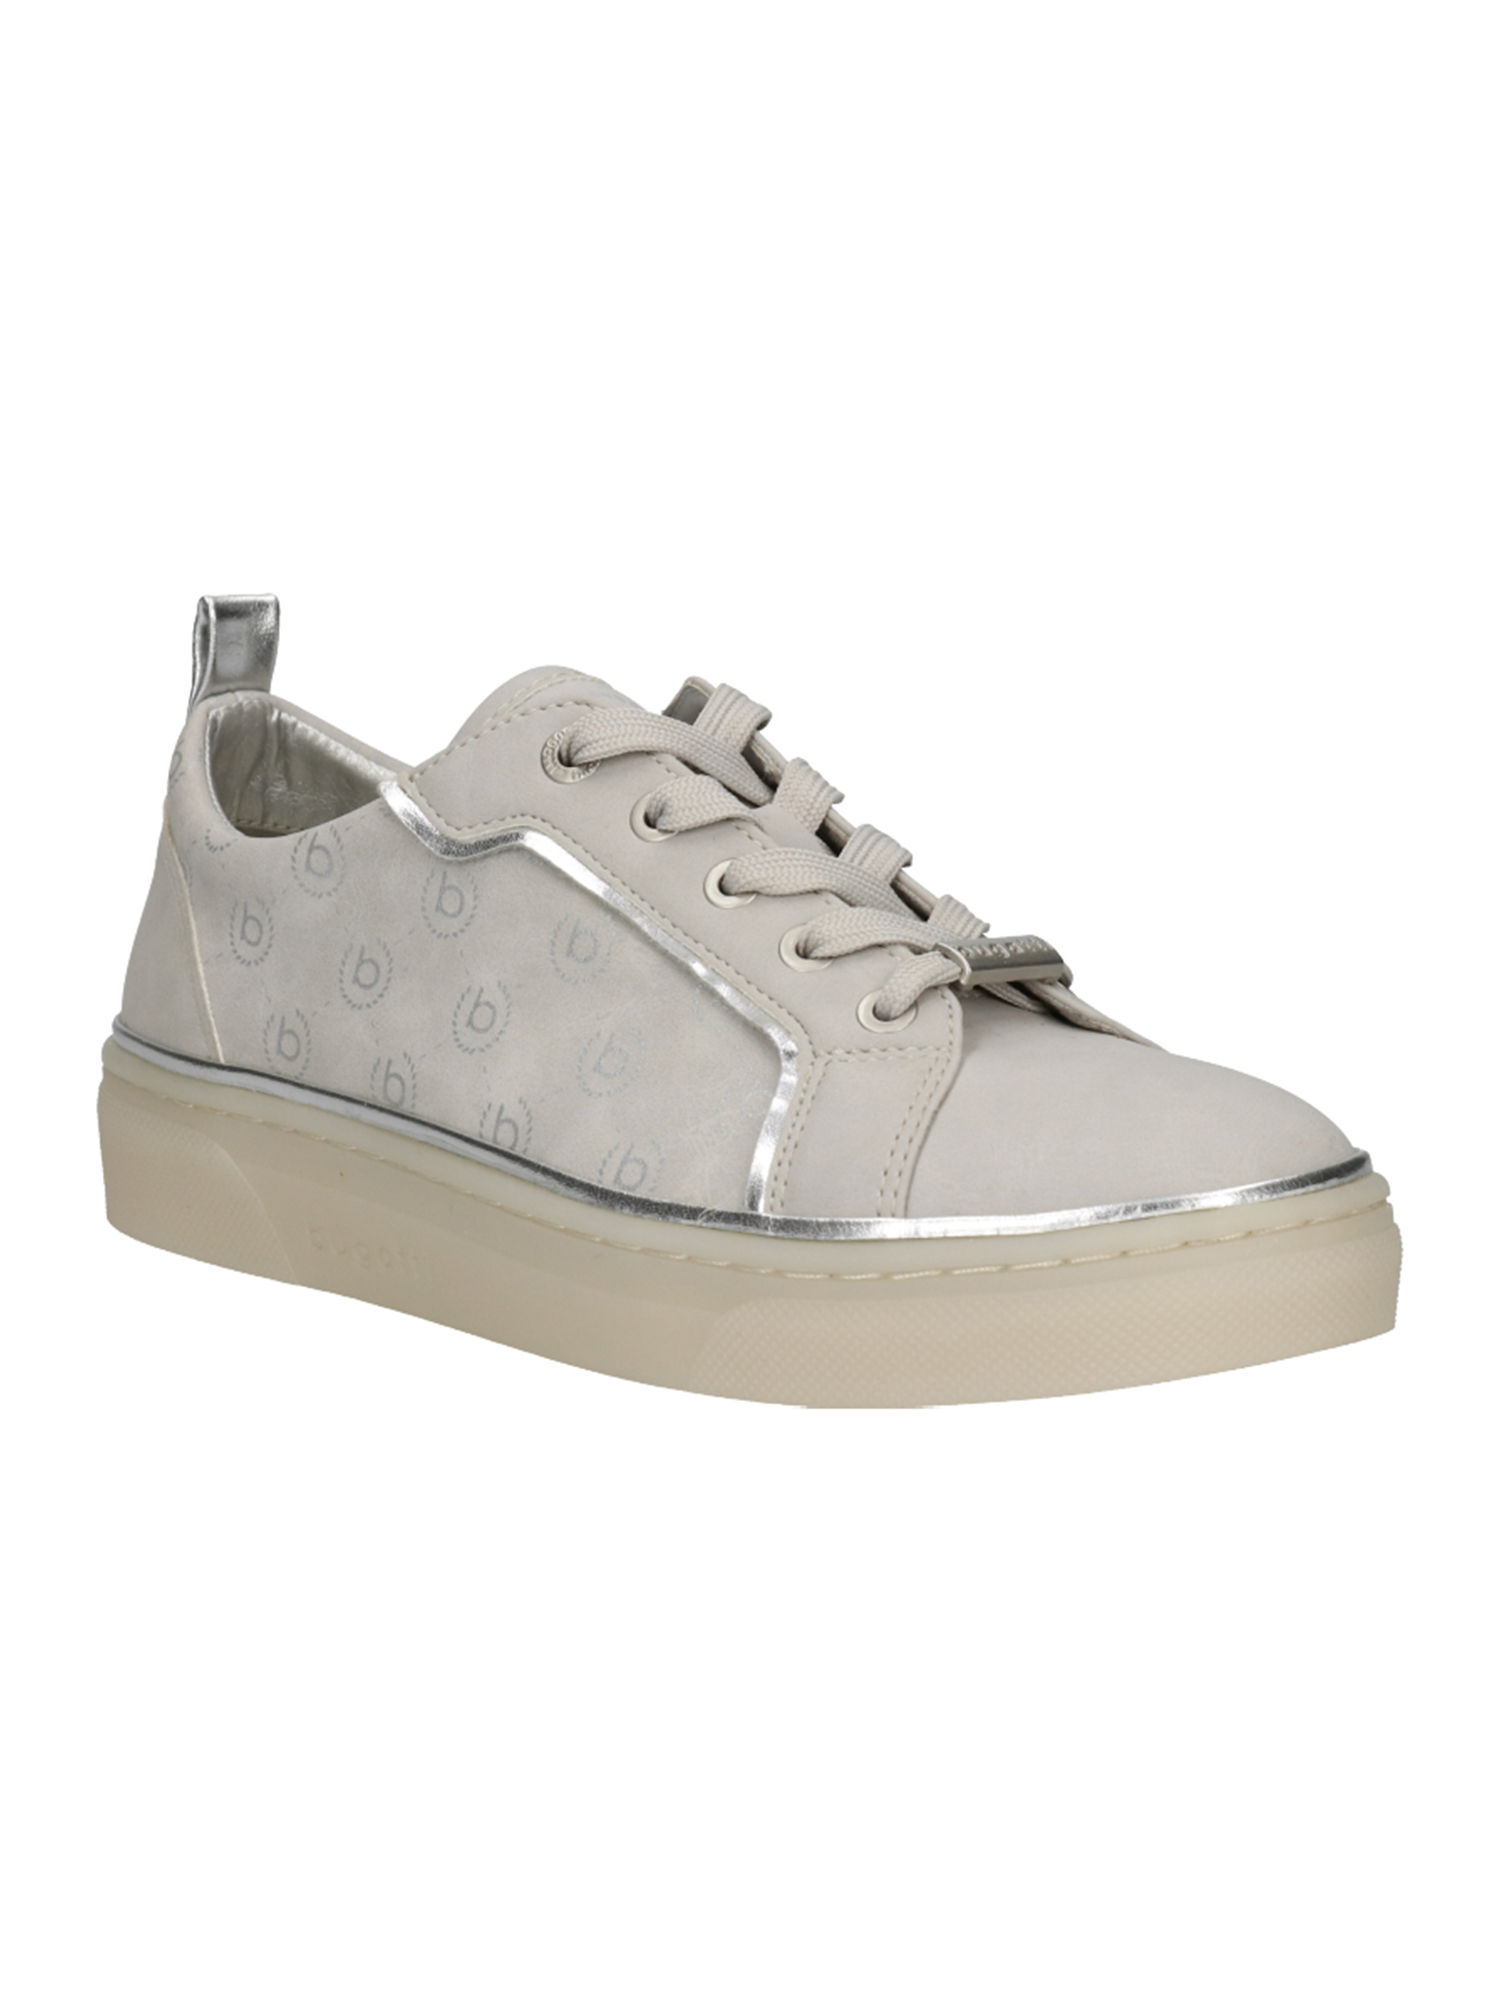 GC Shoes Women's Kalio Lace-Up Sneakers - Macy's